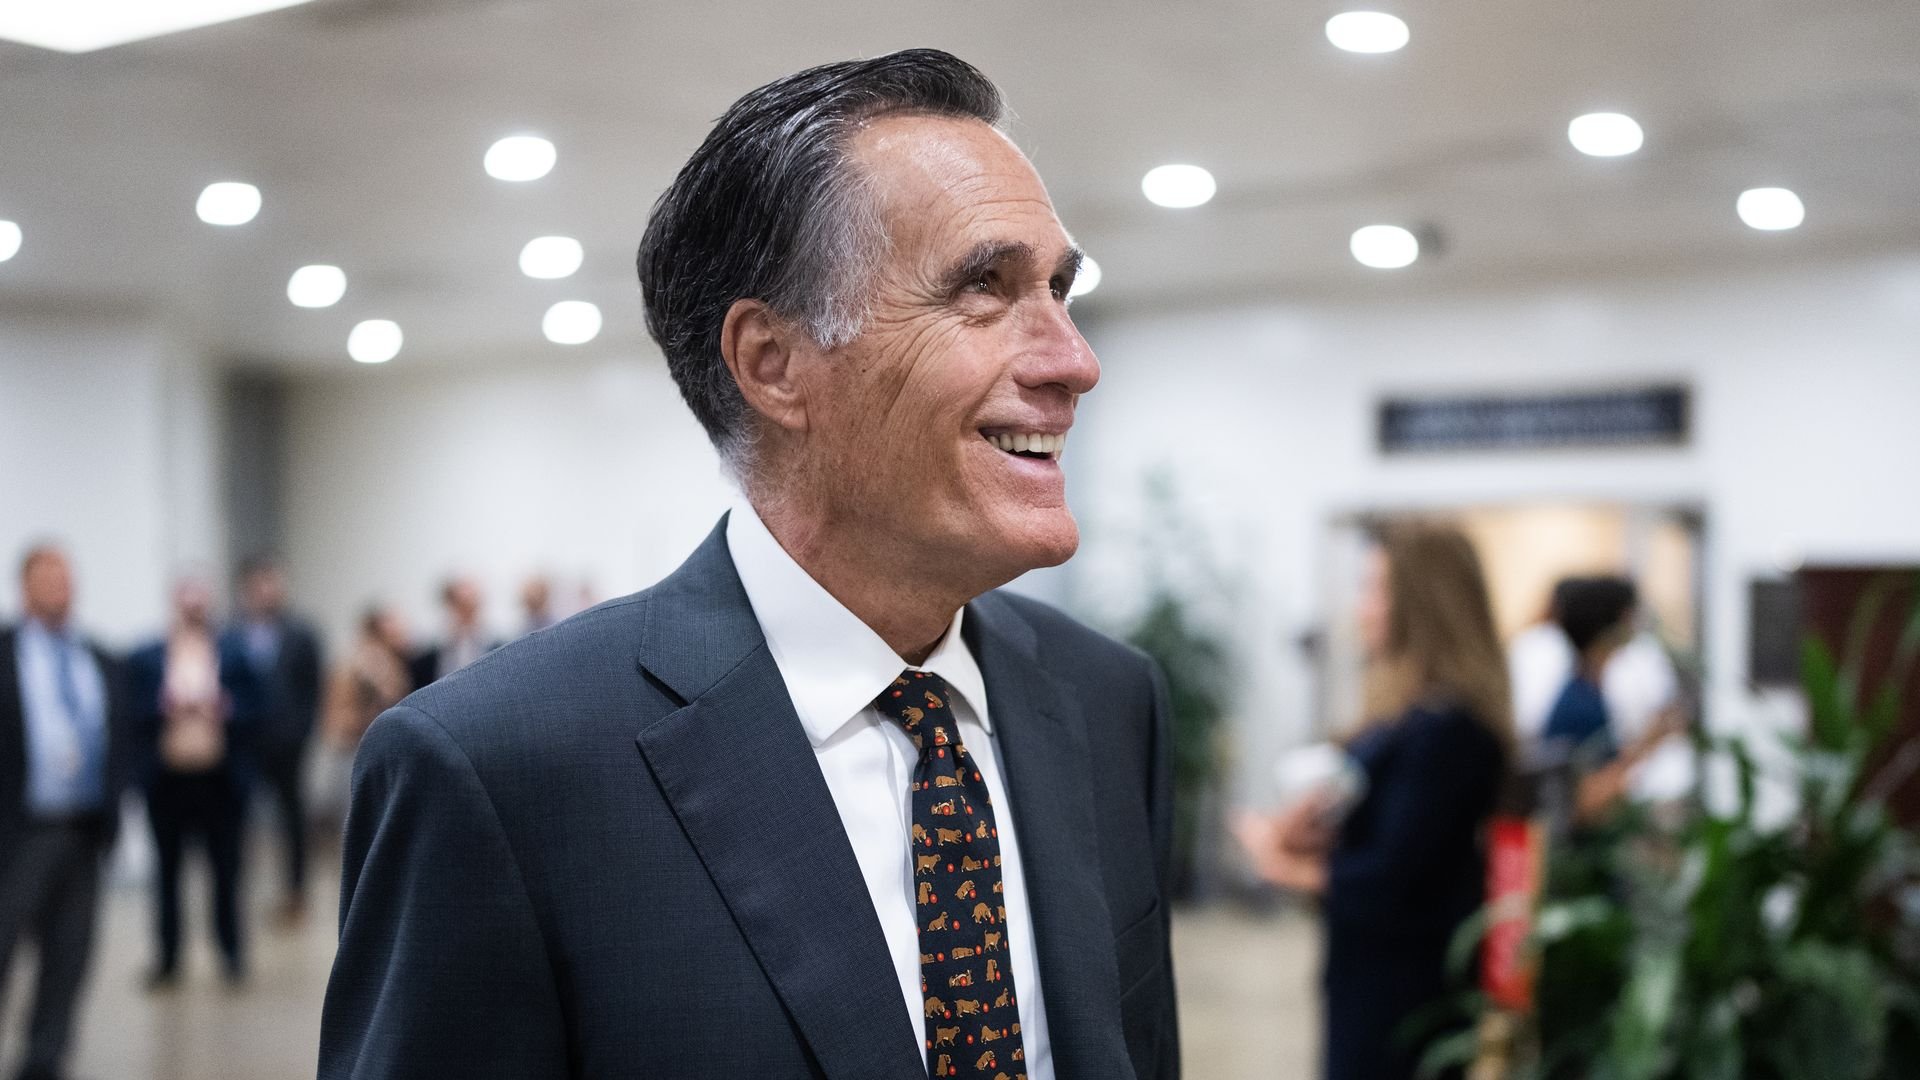 Retiring Romney unleashes on GOP colleagues